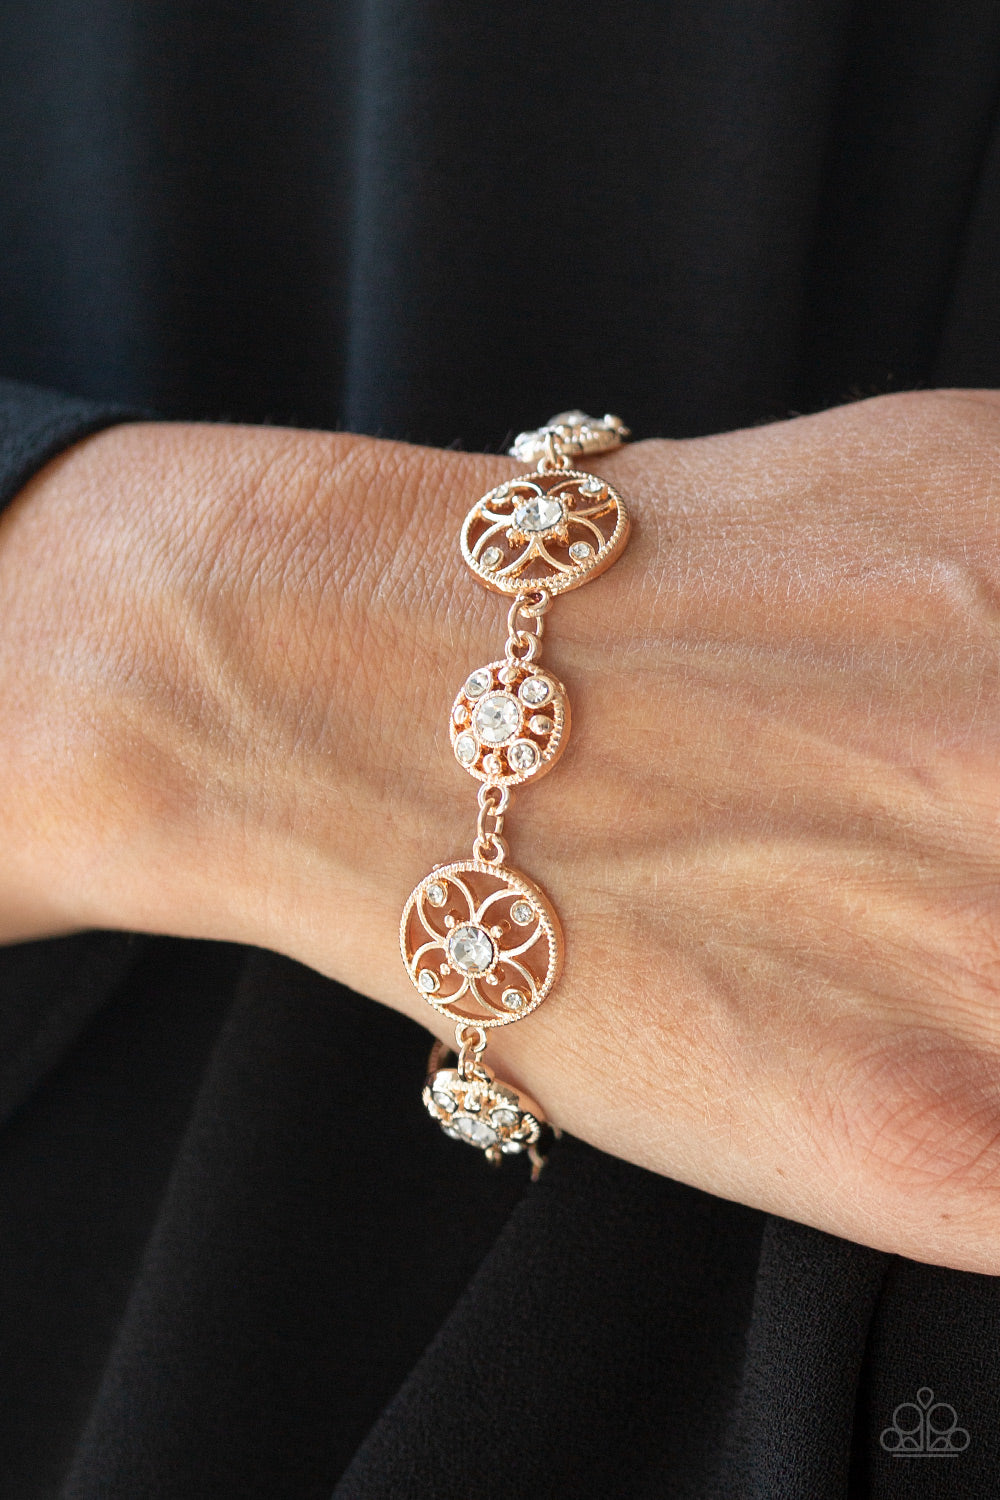 FLORAL FLORESCENCE AND FLOWERY FASHION - ROSE GOLD SET